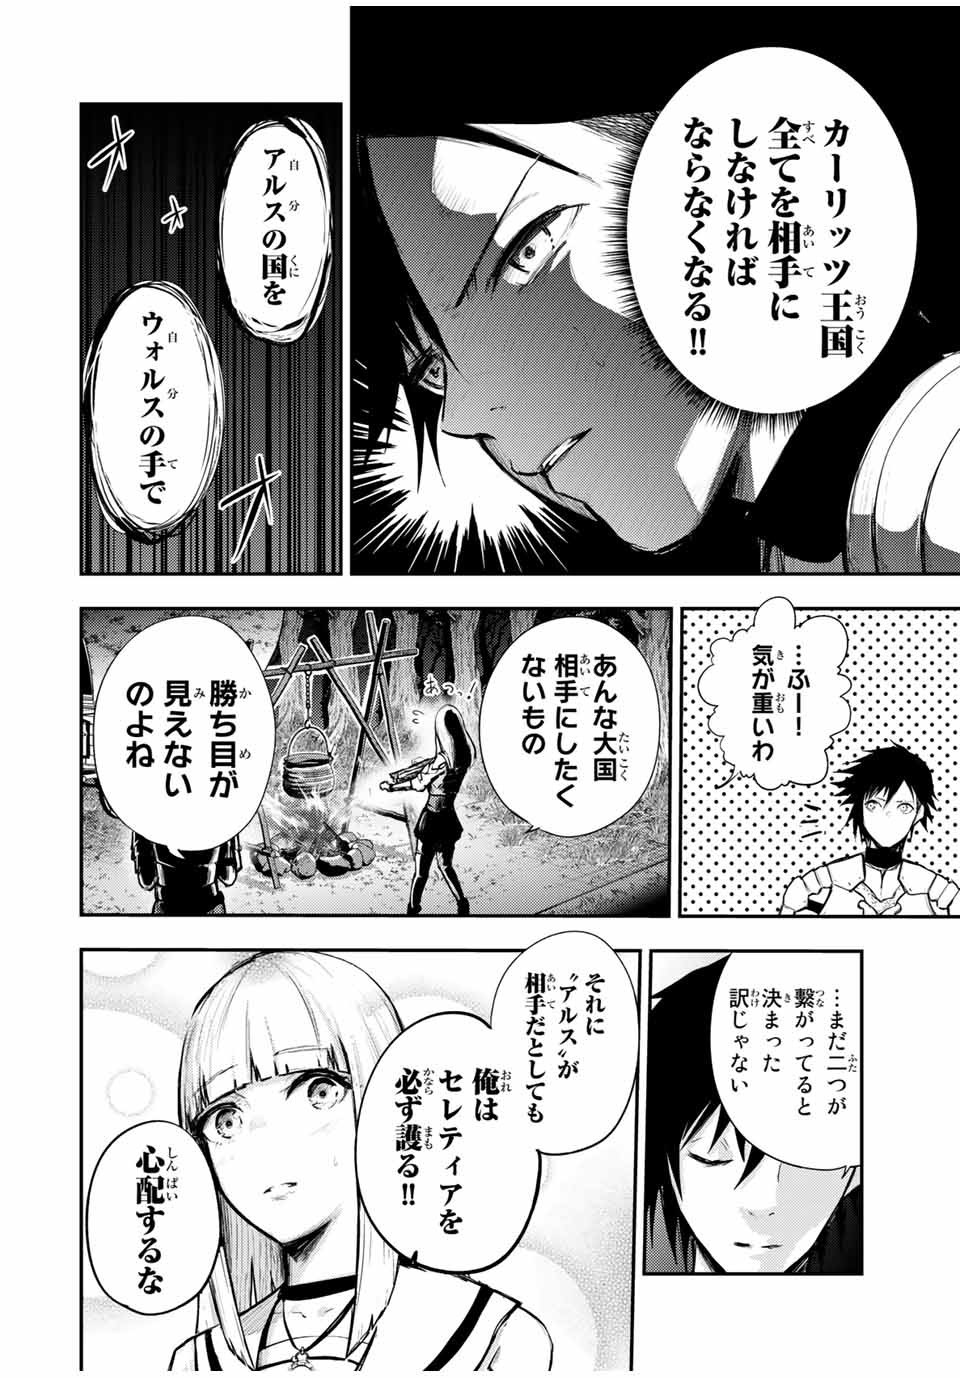 the strongest former prince-; 奴隷転生 ～その奴隷、最強の元王子につき～ 第27話 - Page 4